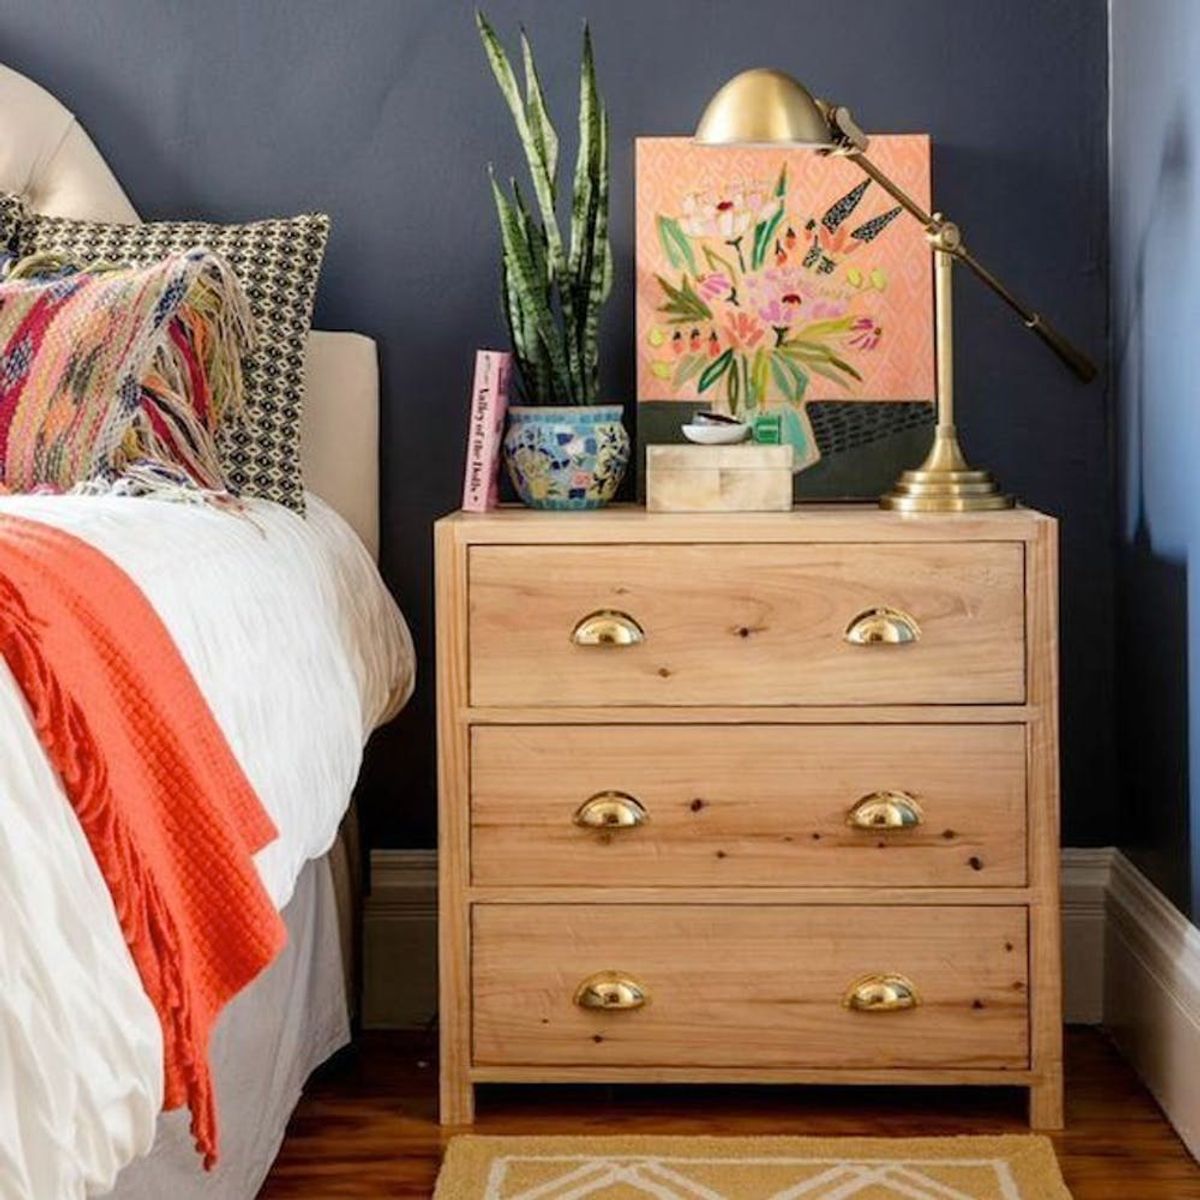 15 Bedside Table #Shelfies to Copy for Yourself